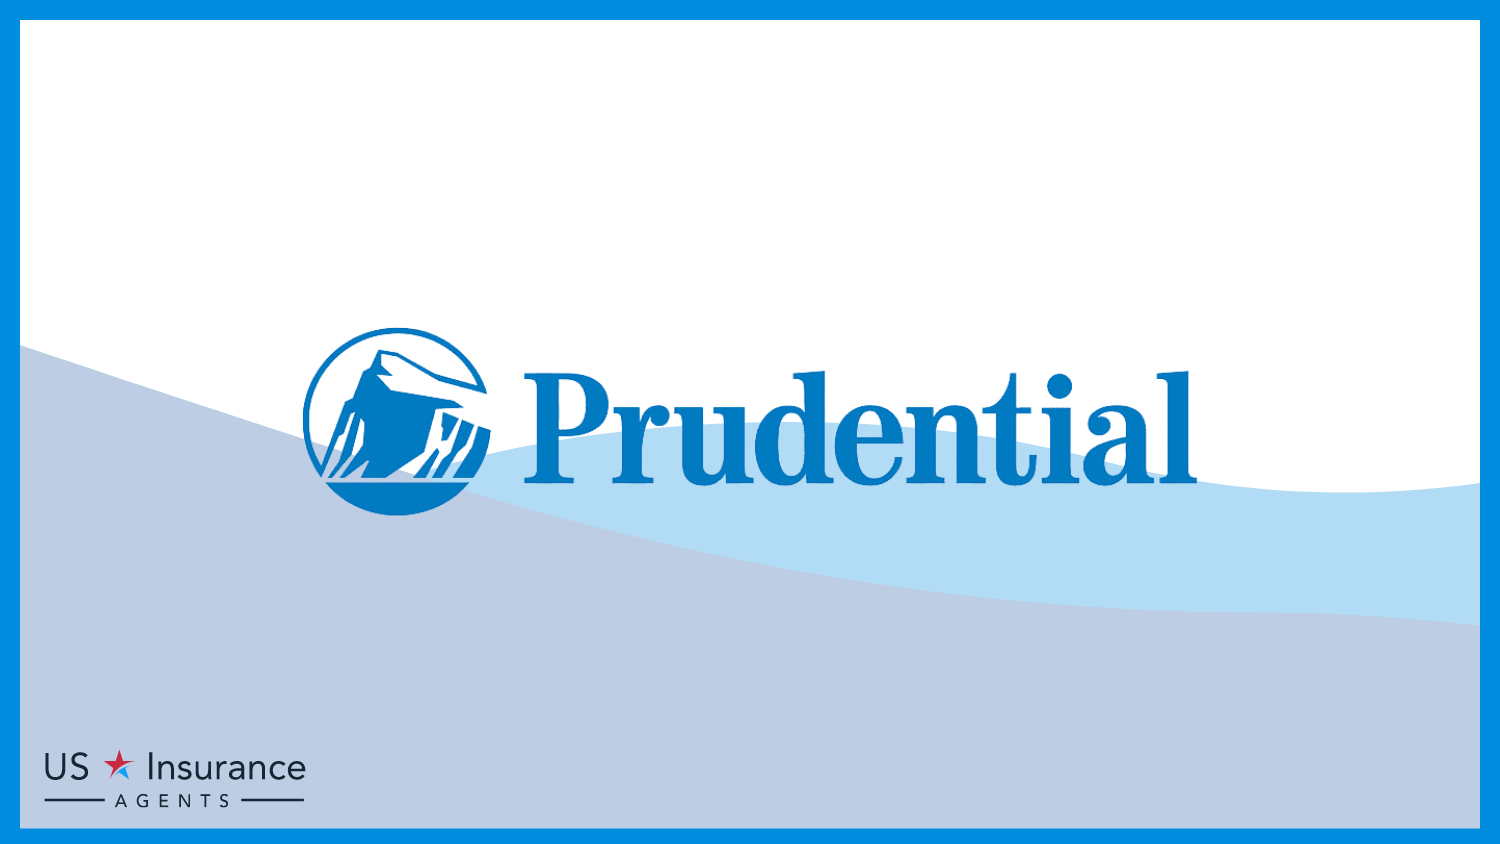 Prudential: Best Life Insurance for People With Cystic Fibrosis